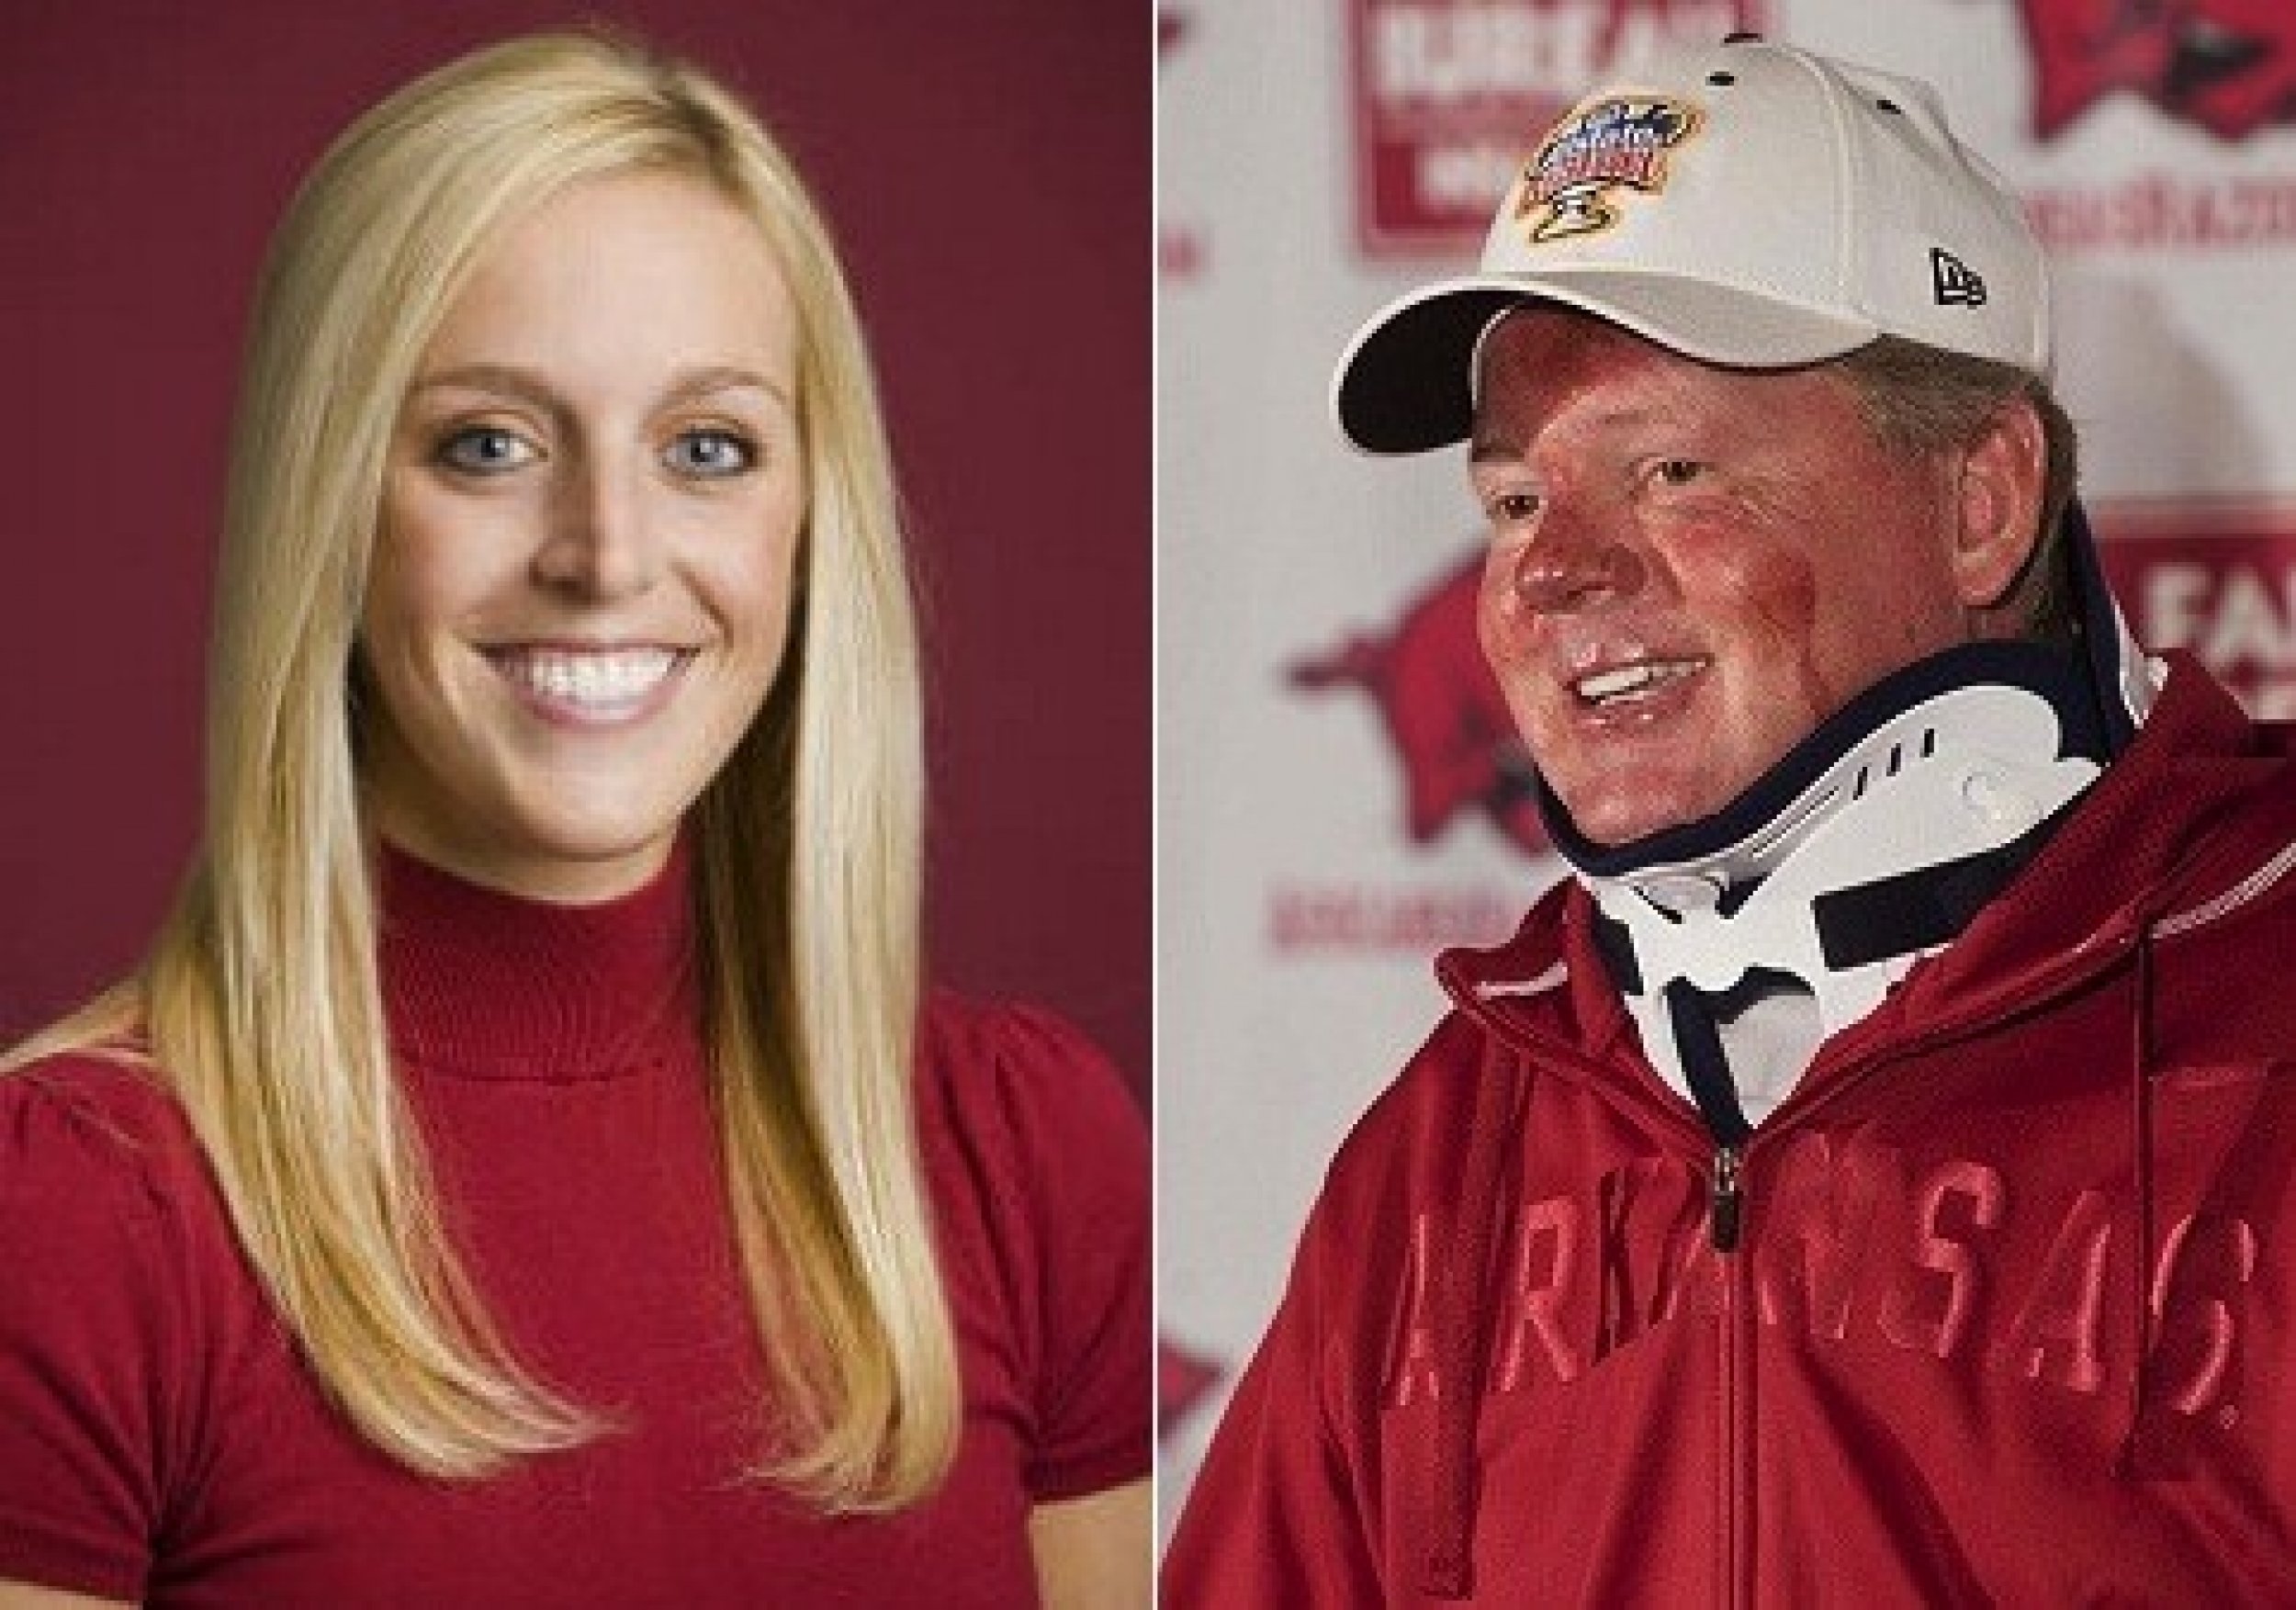 Jessica Dorrell Bobby Petrino Admits ‘Inappropriate Relationship’ With